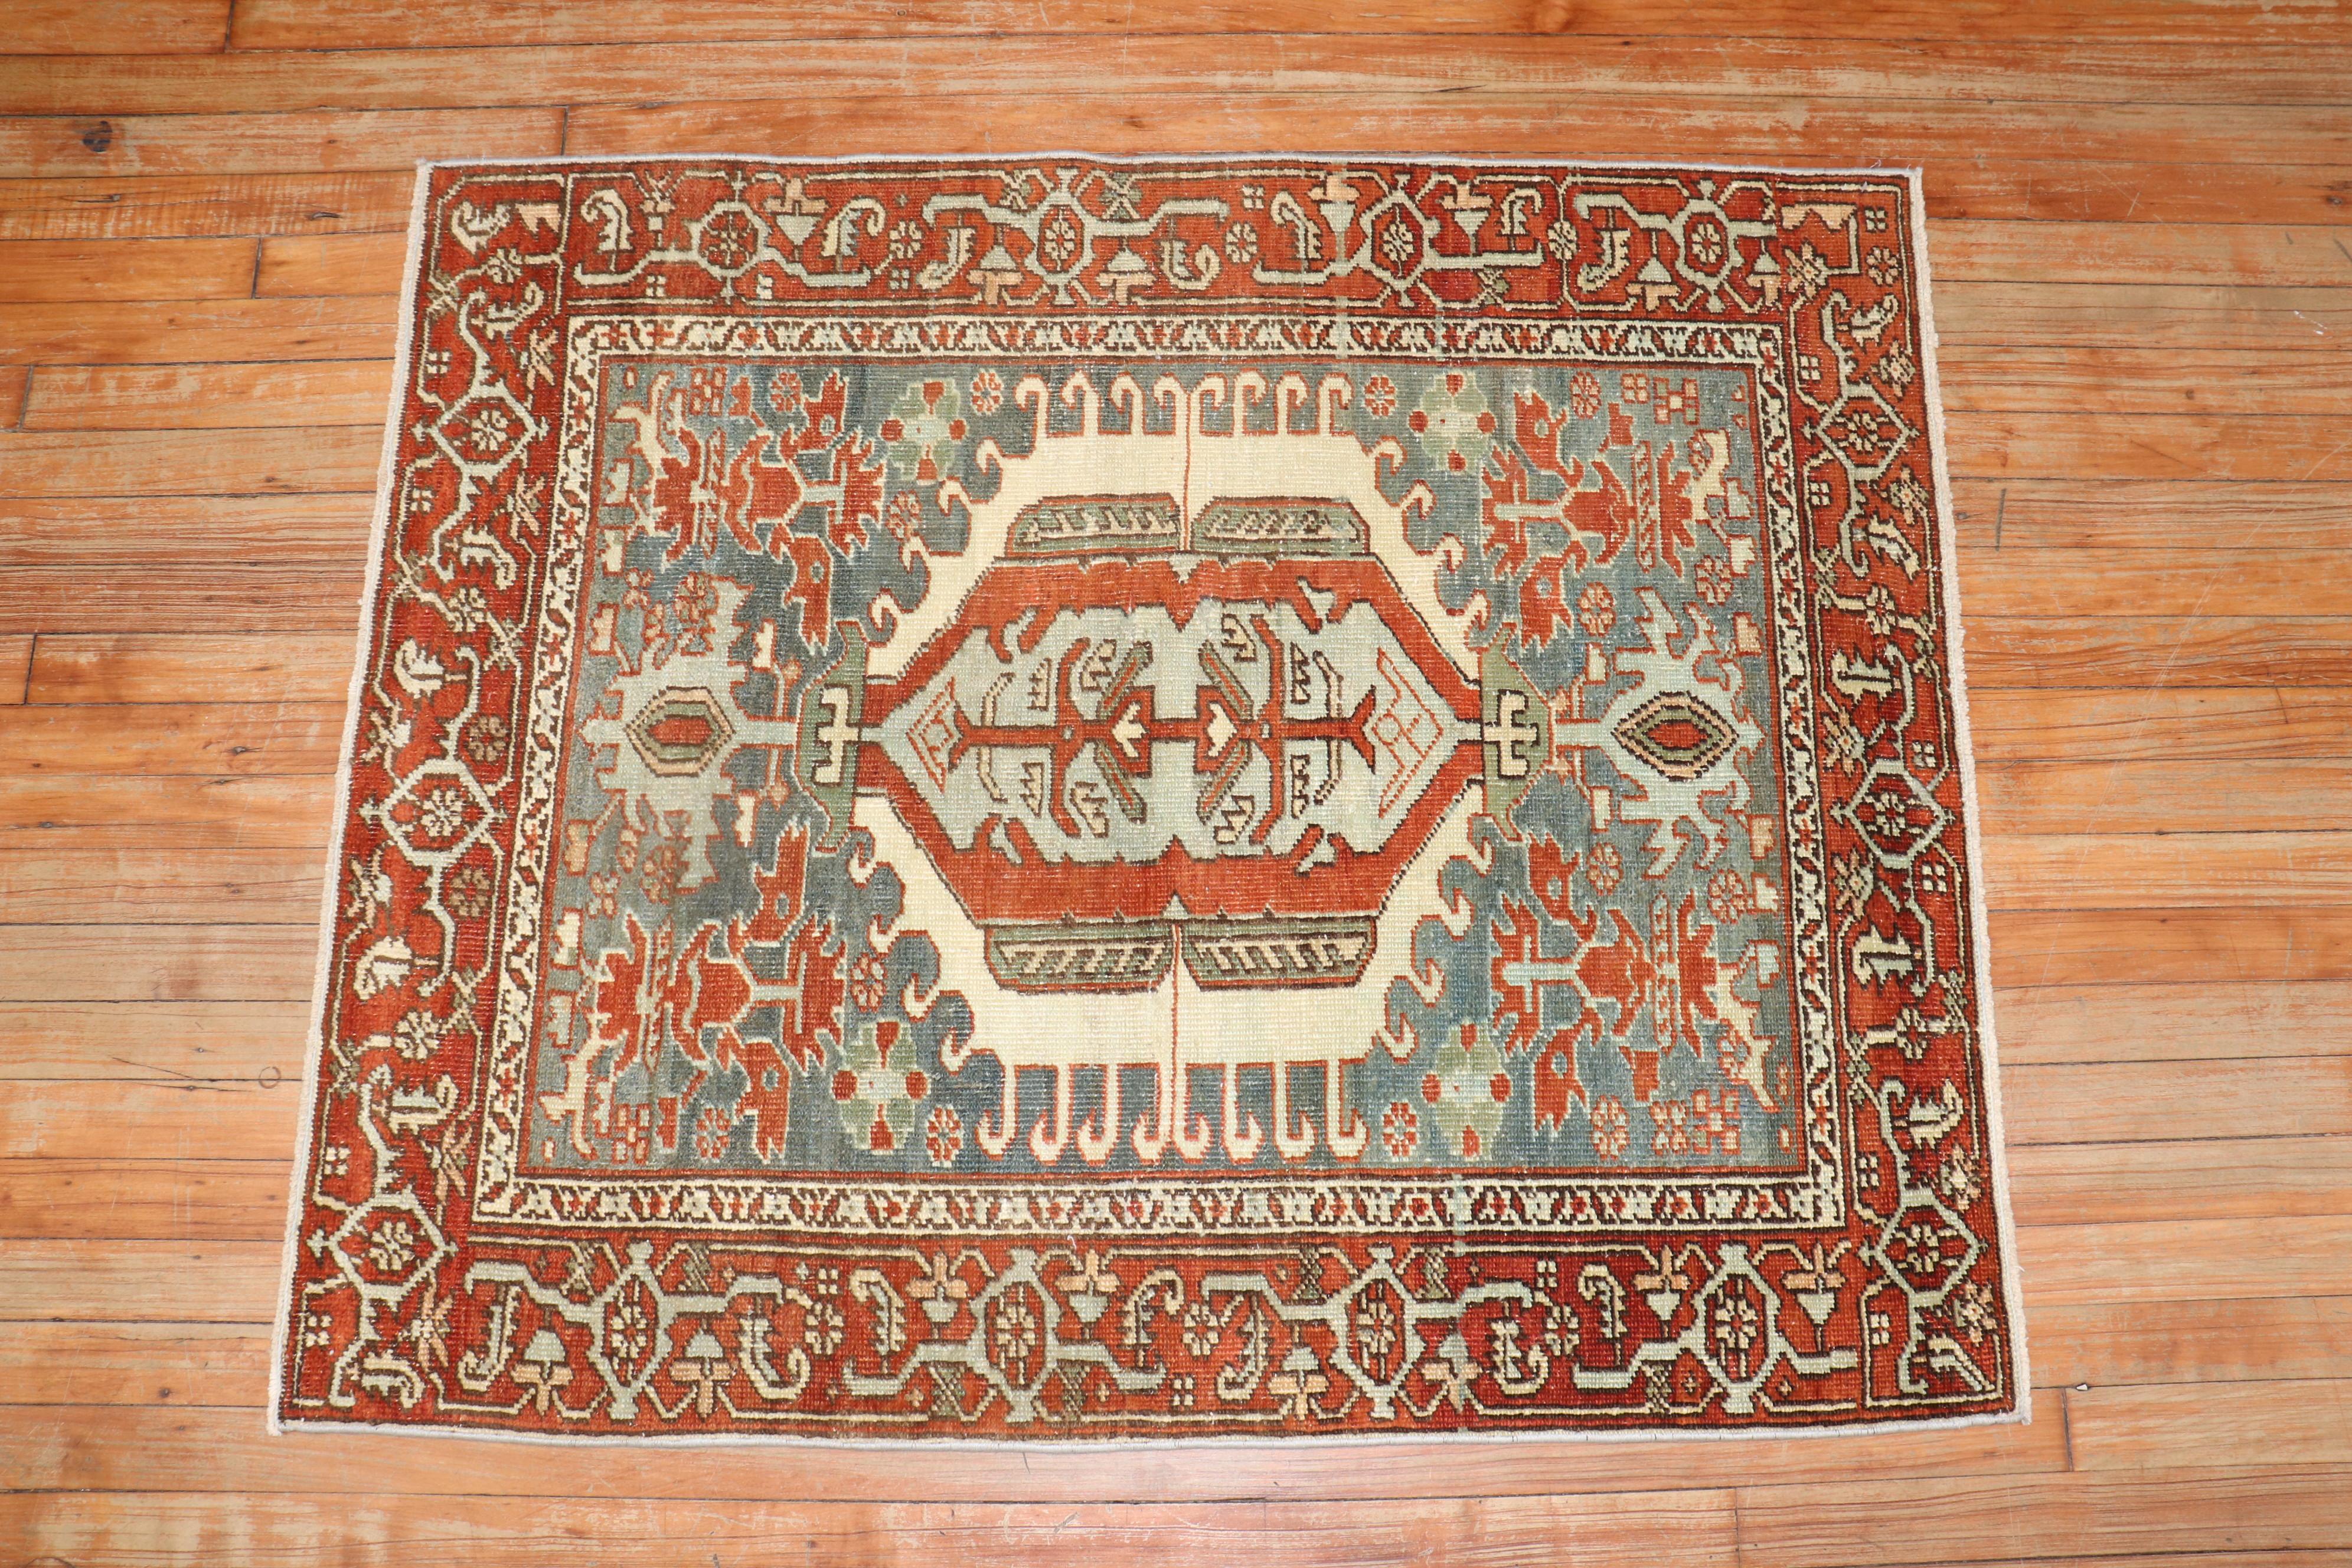 A Square Antique Persian Heriz rug from the 2nd quarter of the 20th century.

Measures: 3'4'' x 4'1''.